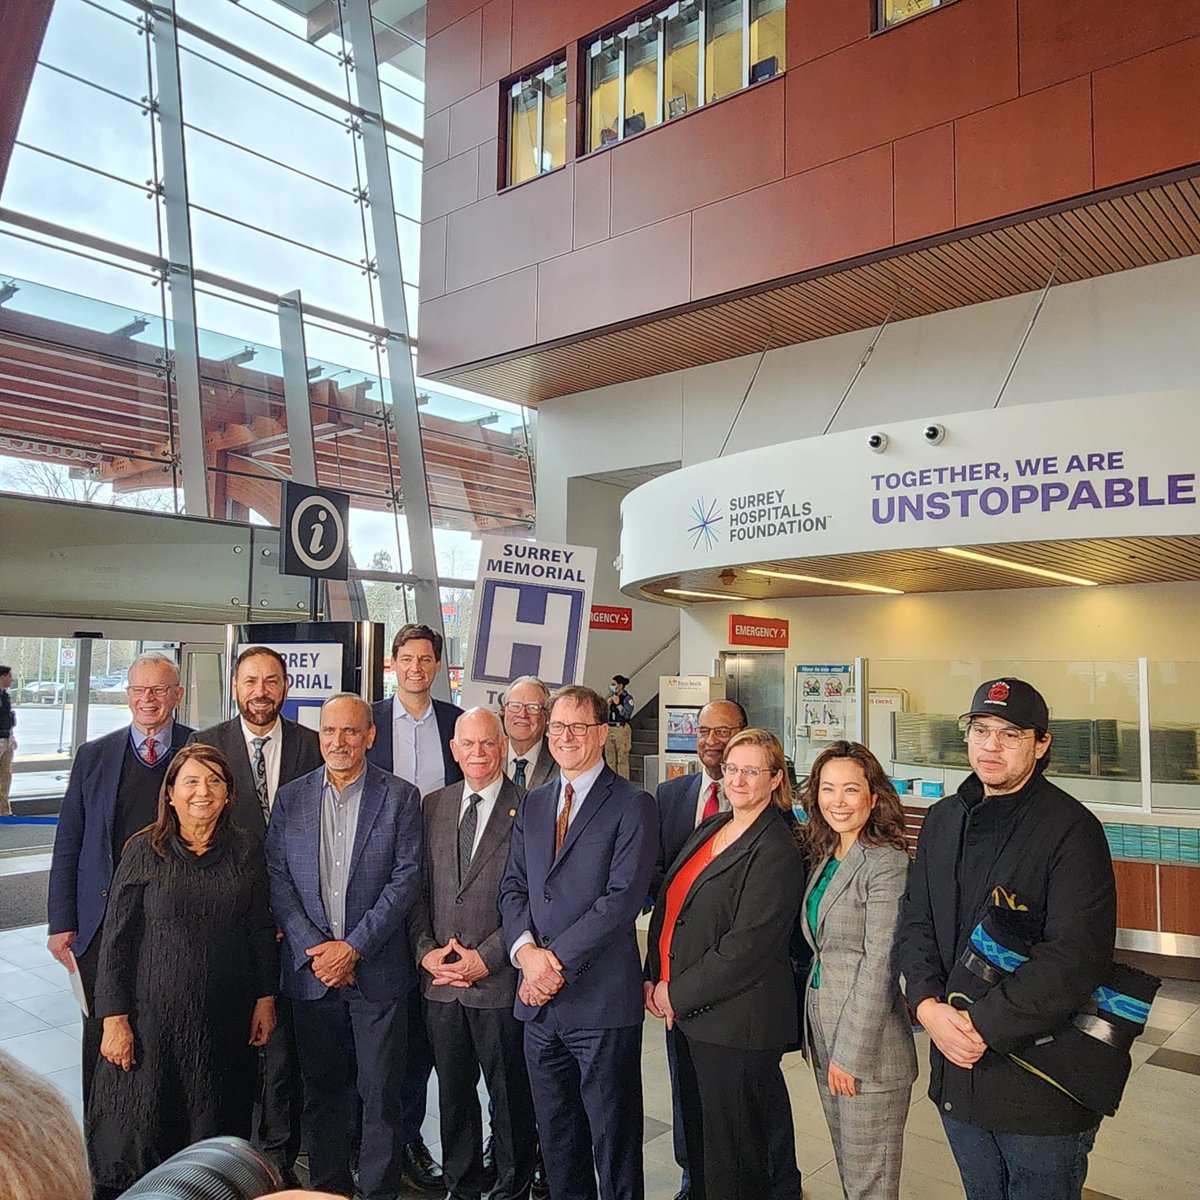 Big news for Surrey! 🏥 A new acute care tower at Surrey Memorial Hospital means better healthcare is on the horizon. It's a huge win for our community. #SurreyBC #HealthcareInnovation #bcpoli